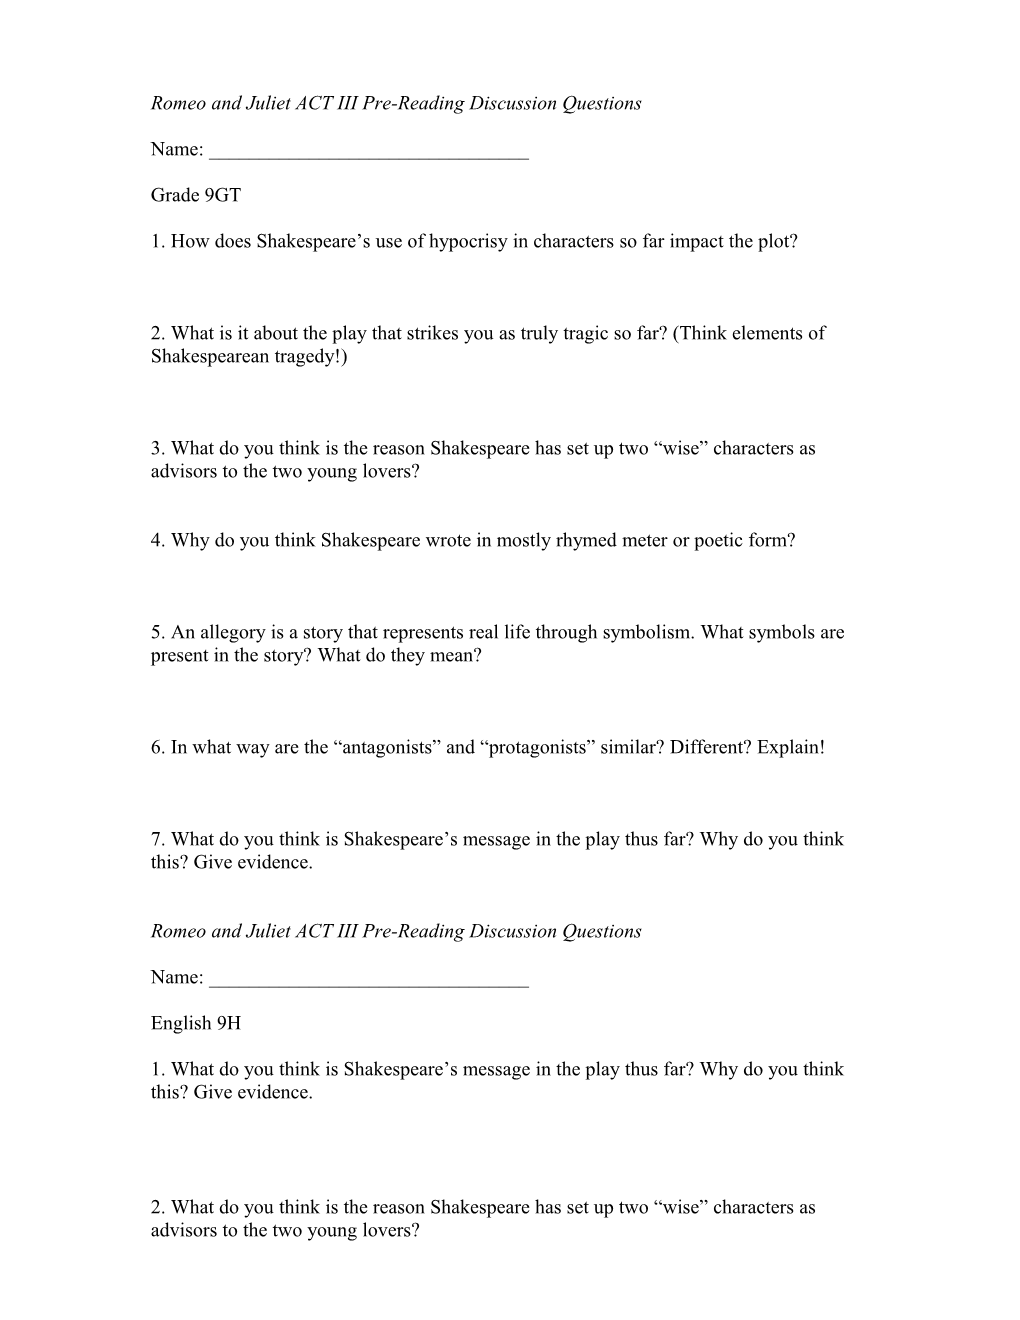 Romeo and Juliet ACT III Pre-Reading Discussion Questions